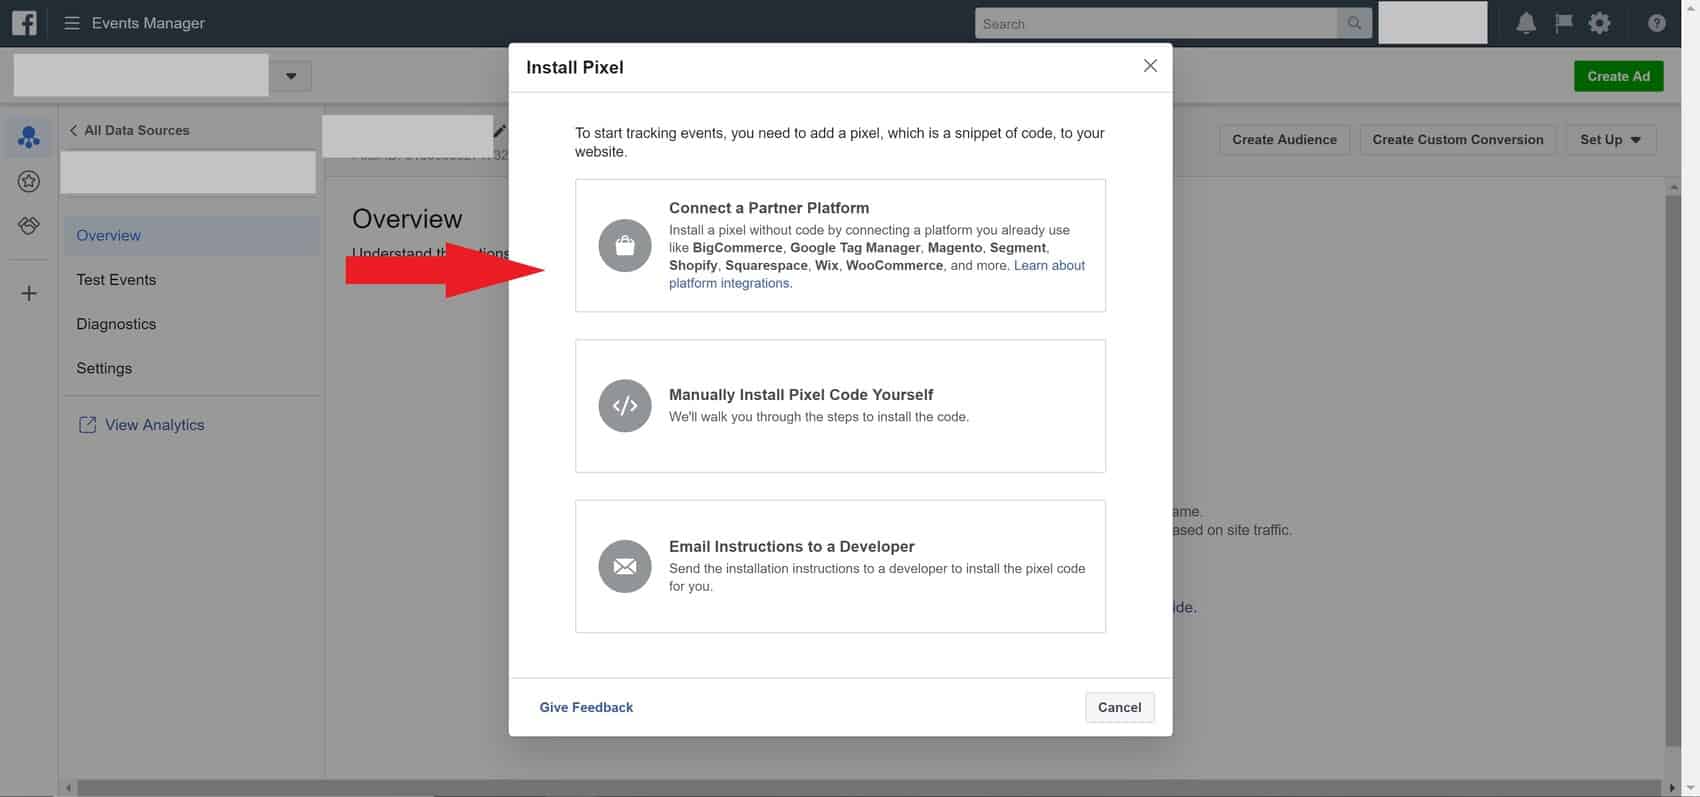 Select option for how to install the Pixel - Facebook advertising access